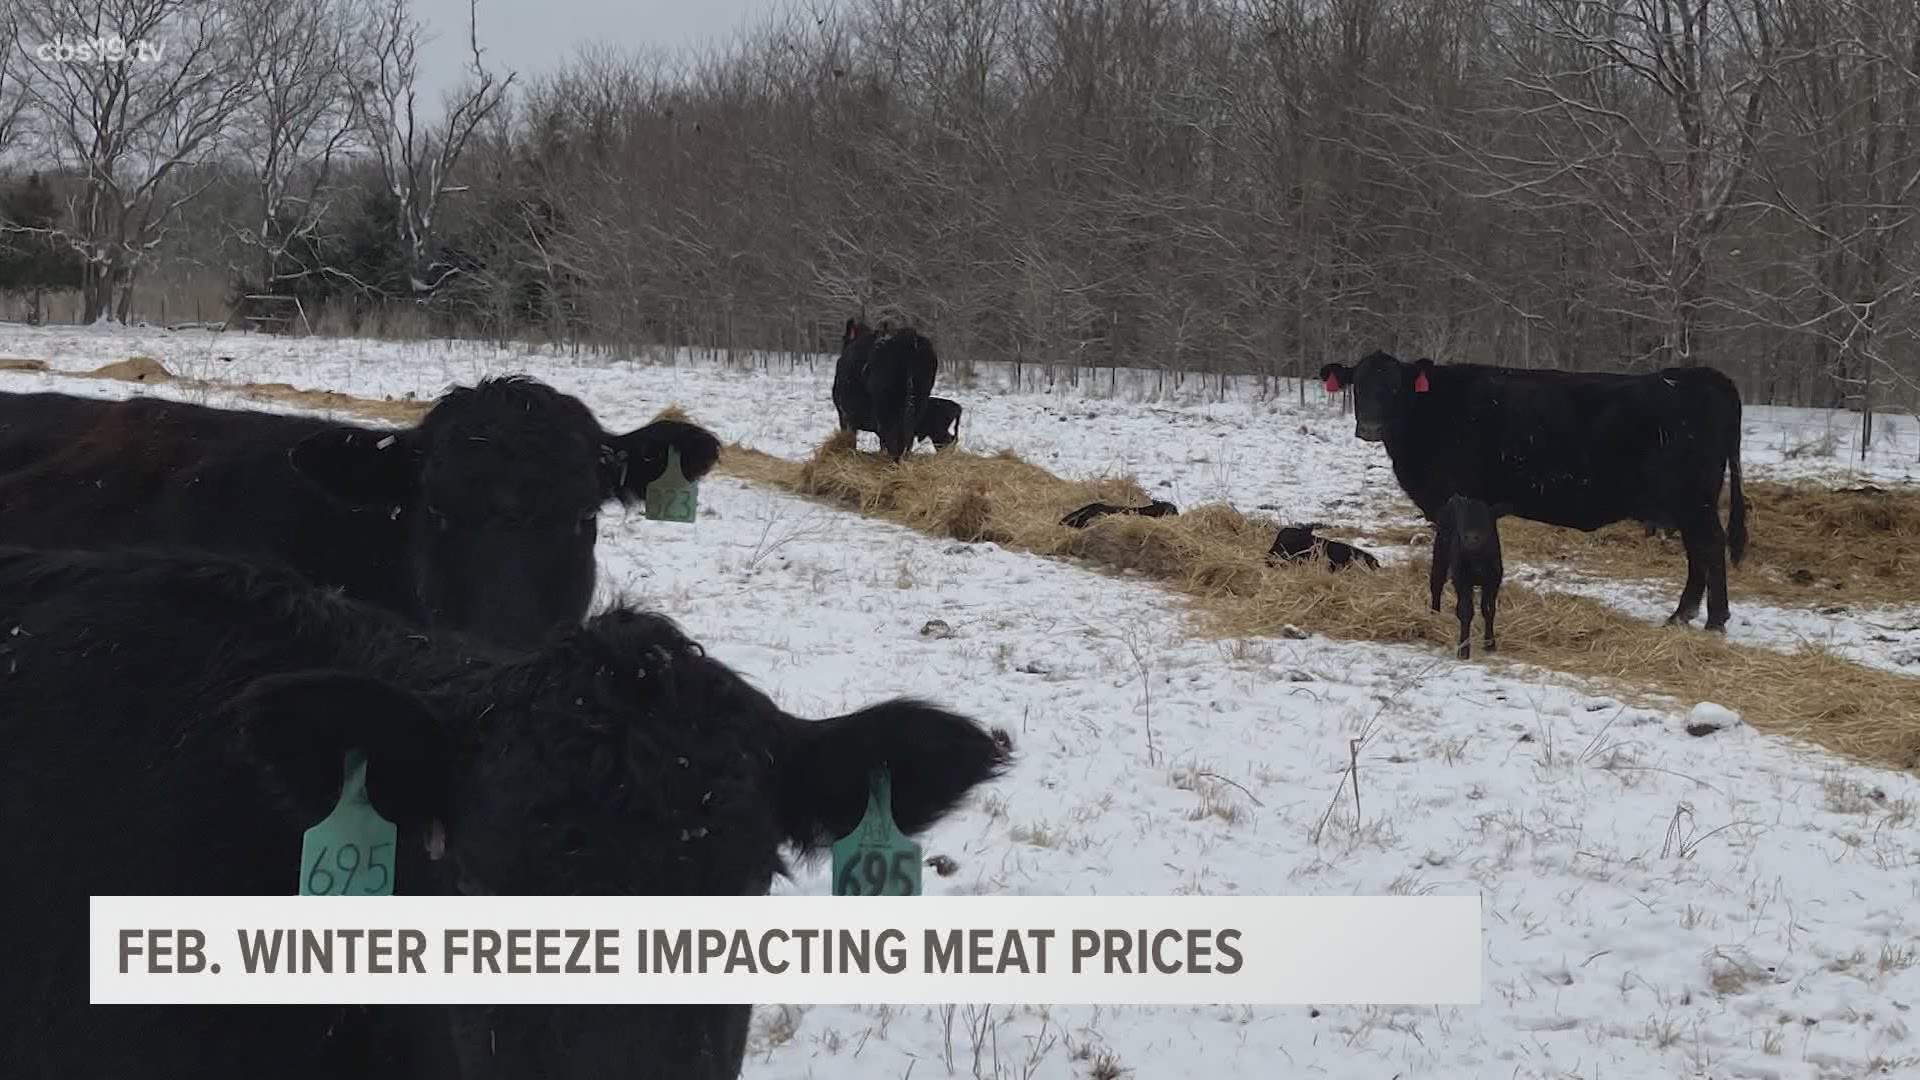 The impact of the snow and ice resulted in a loss of livestock for ranchers and an increase in meat prices for consumers.